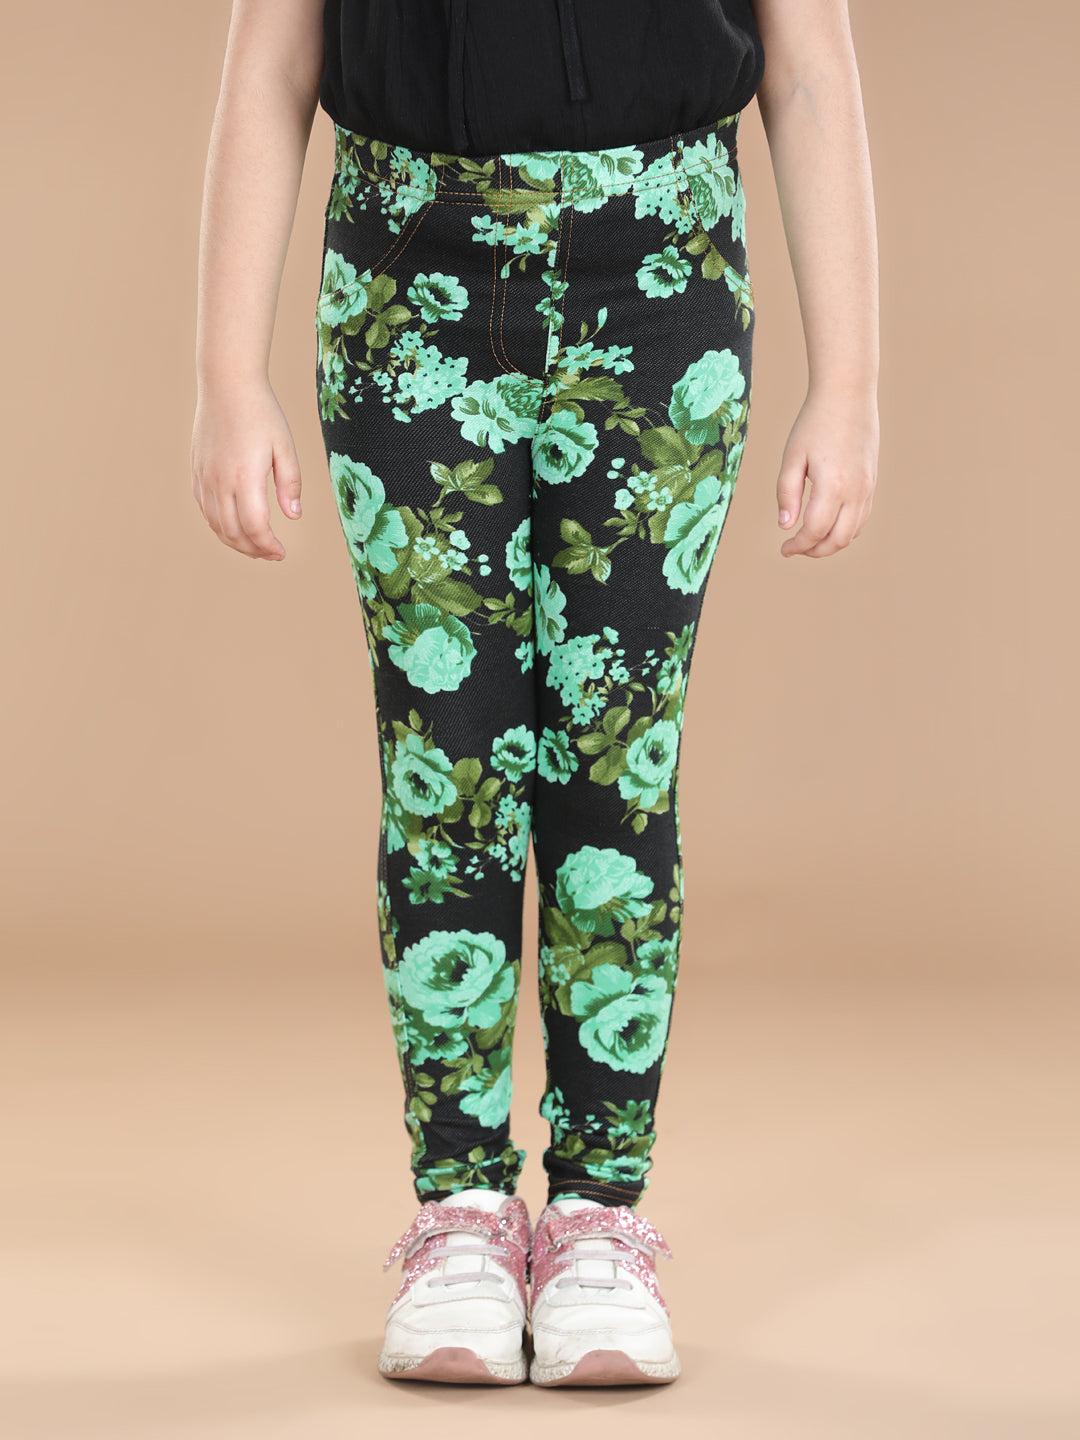 Girls Cotton Floral Printed Pack of 2 Jeggings